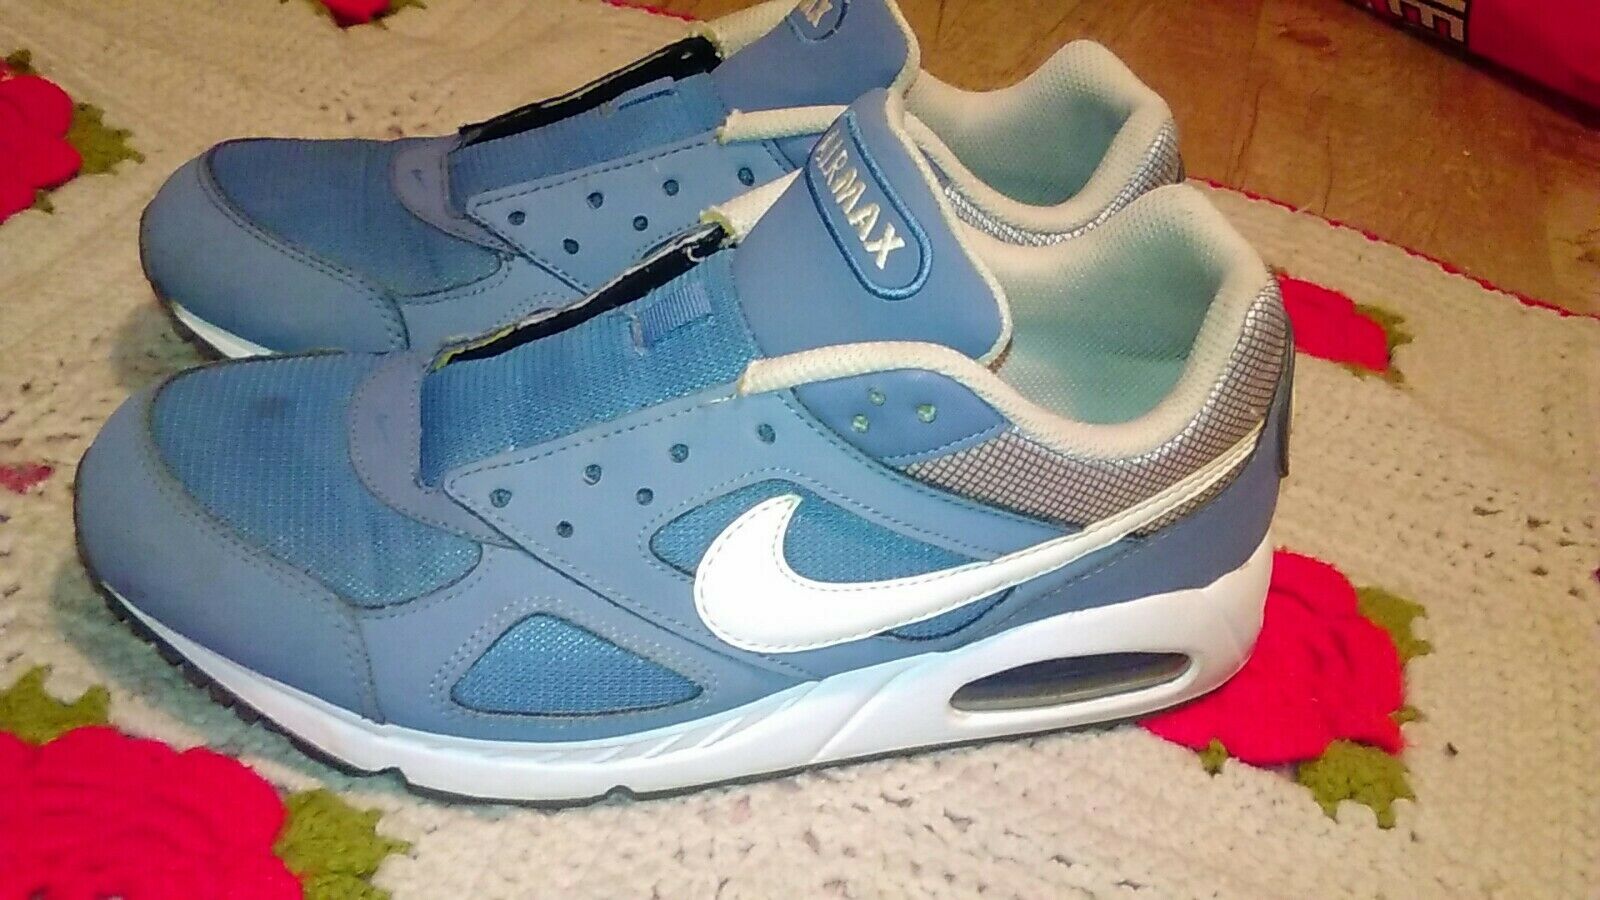 2017 NIKE Air Max Men's Shoes Size 10 Blue Athletic No Laces Basketball Running